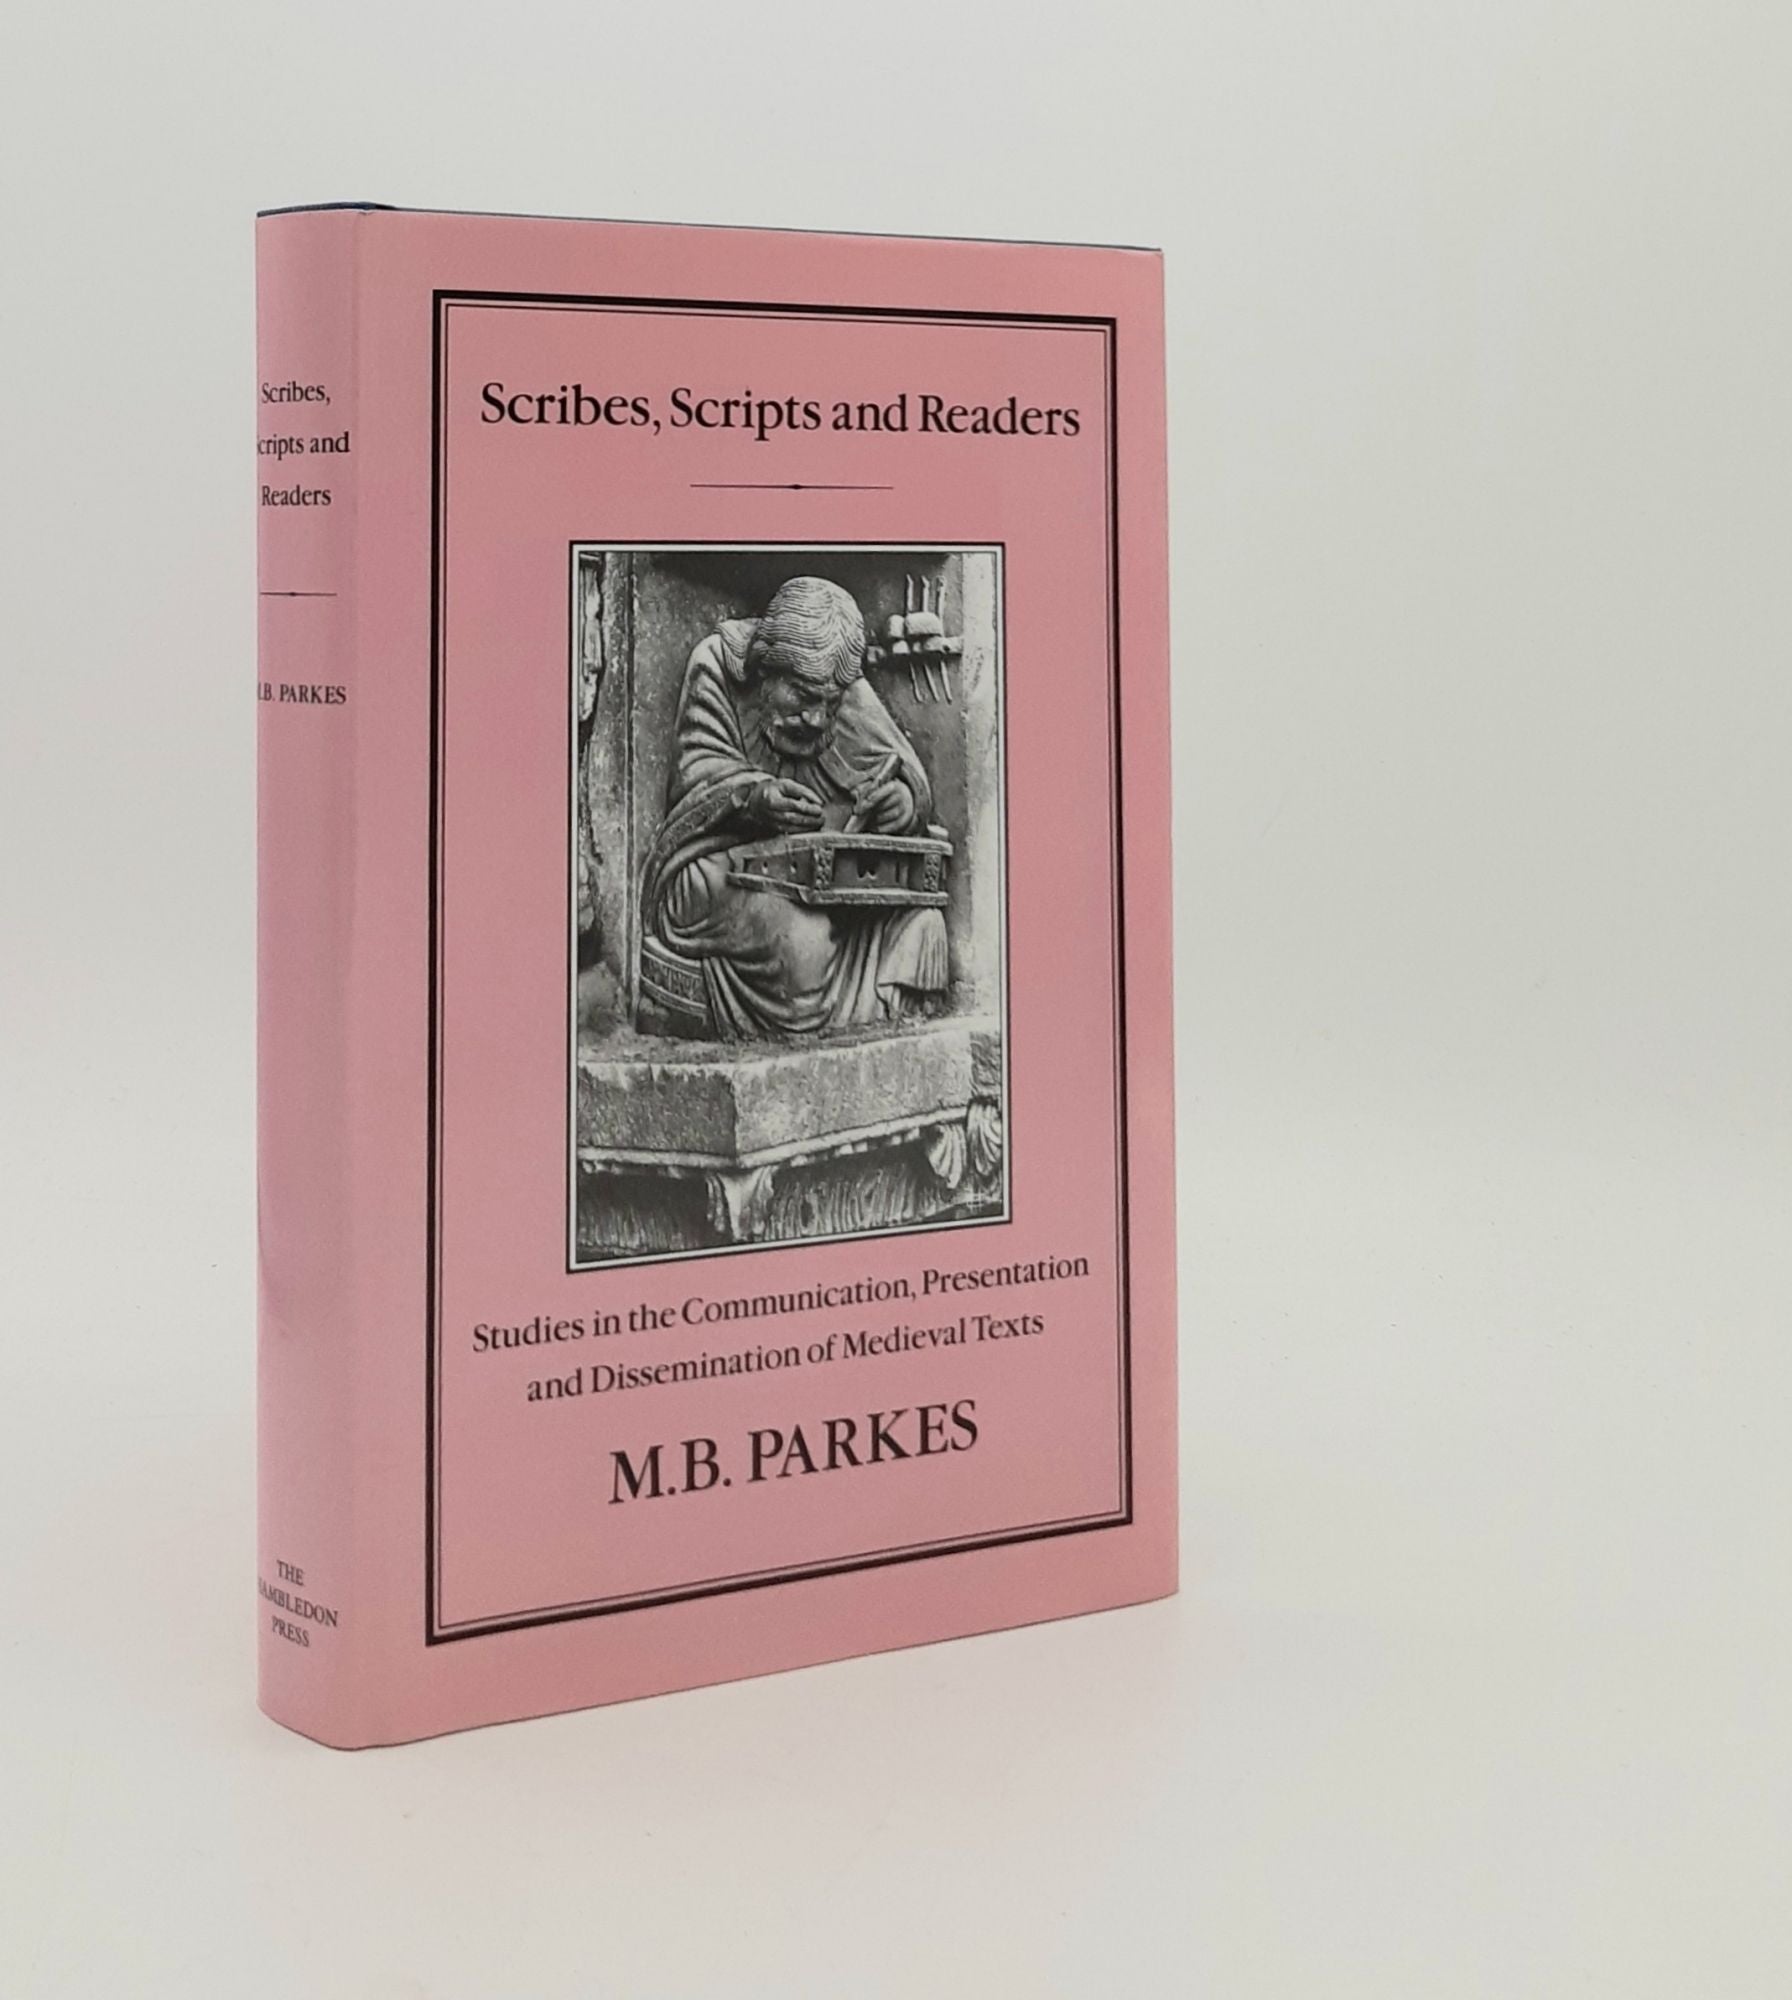 PARKES M.B. - Scribes Scripts and Readers Studies in the Communication Presentation and Dissemination of Medieval Texts